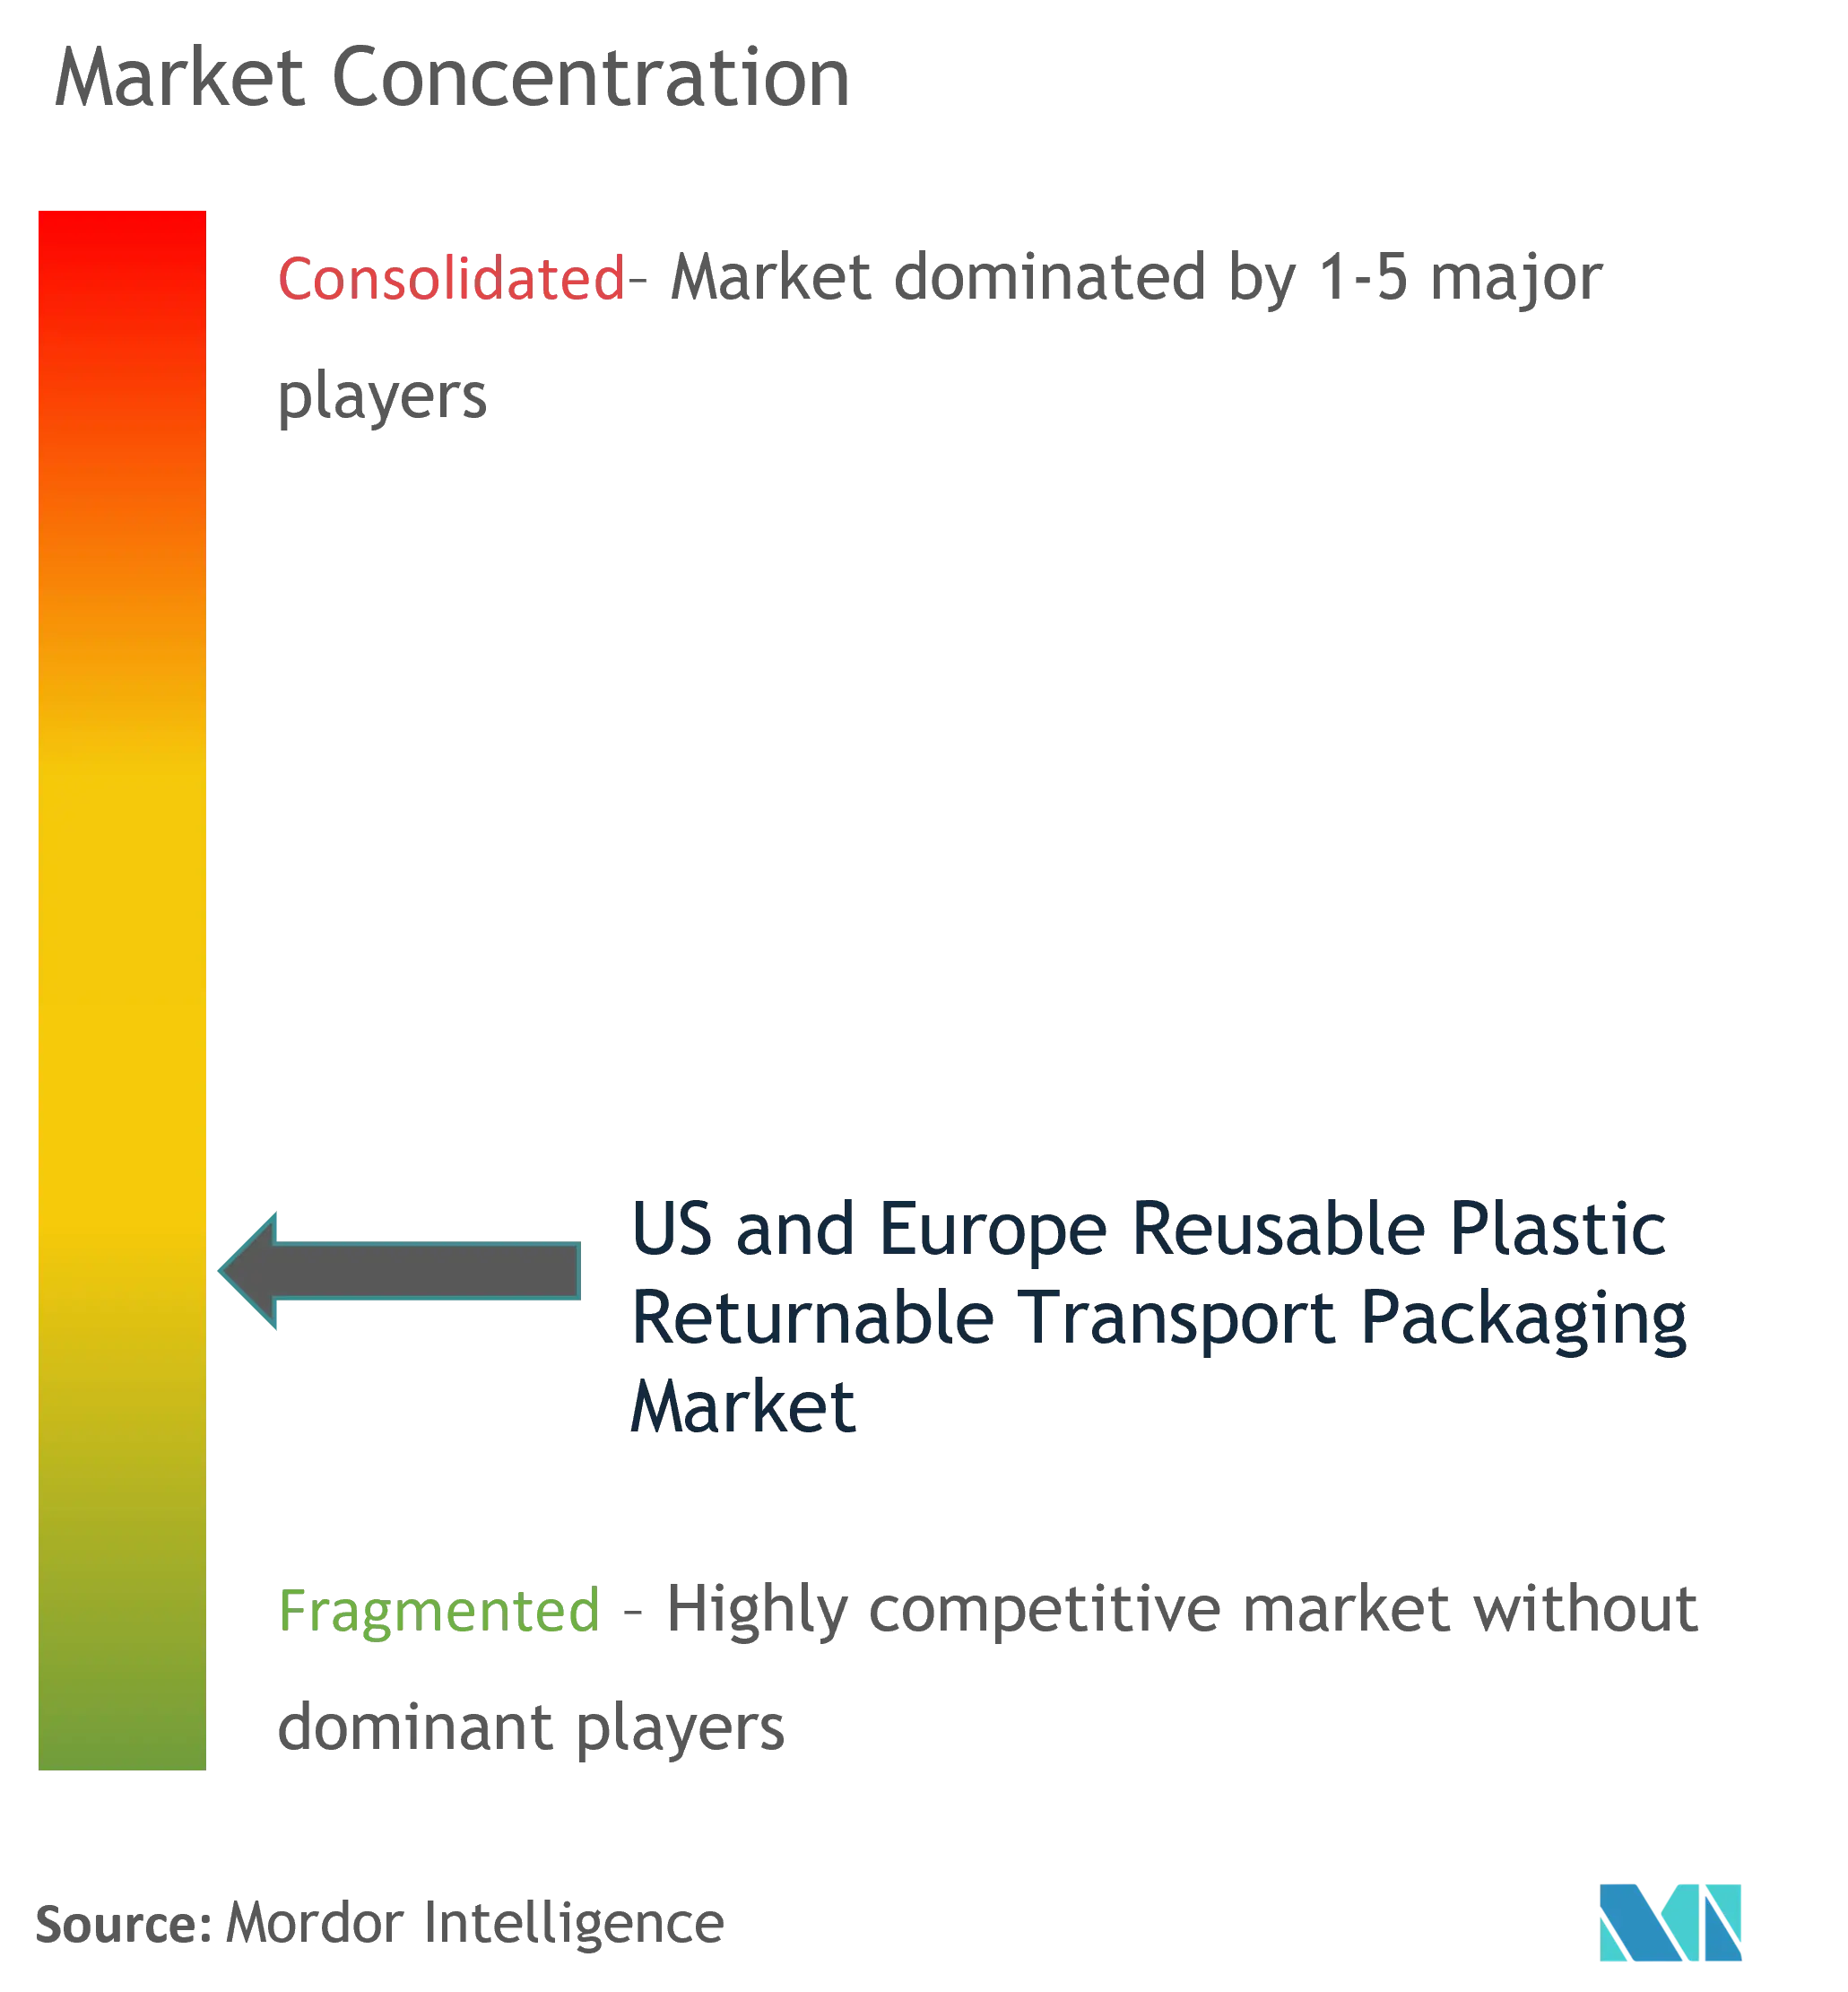 United States and Europe Reusable Plastic Returnable Transport Packaging Market Concentration